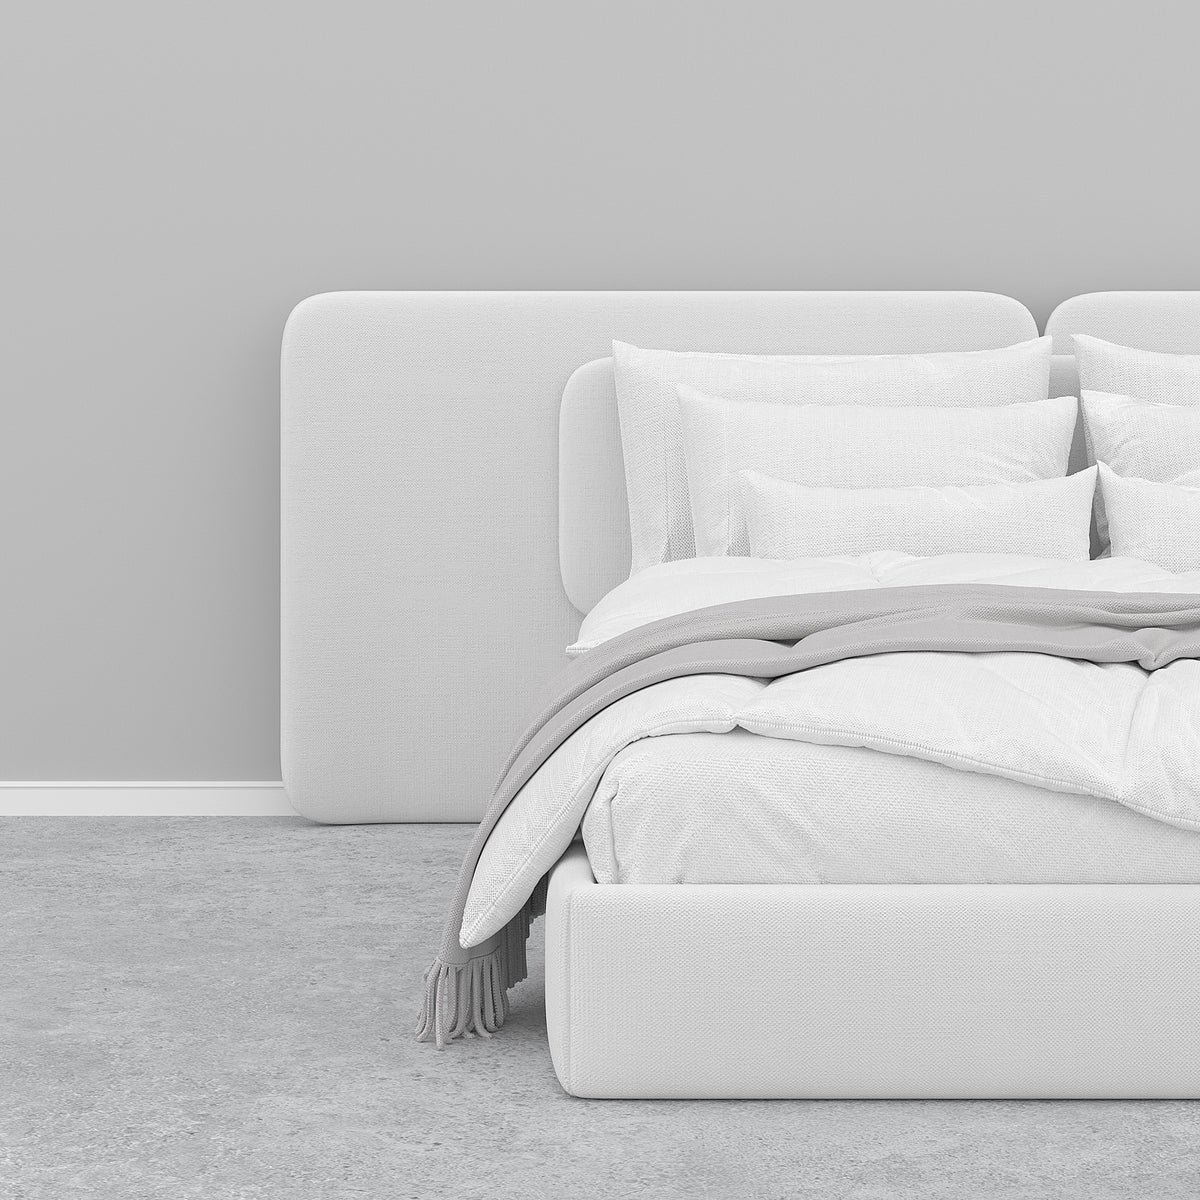 Spartan Bed / Off-White Linen